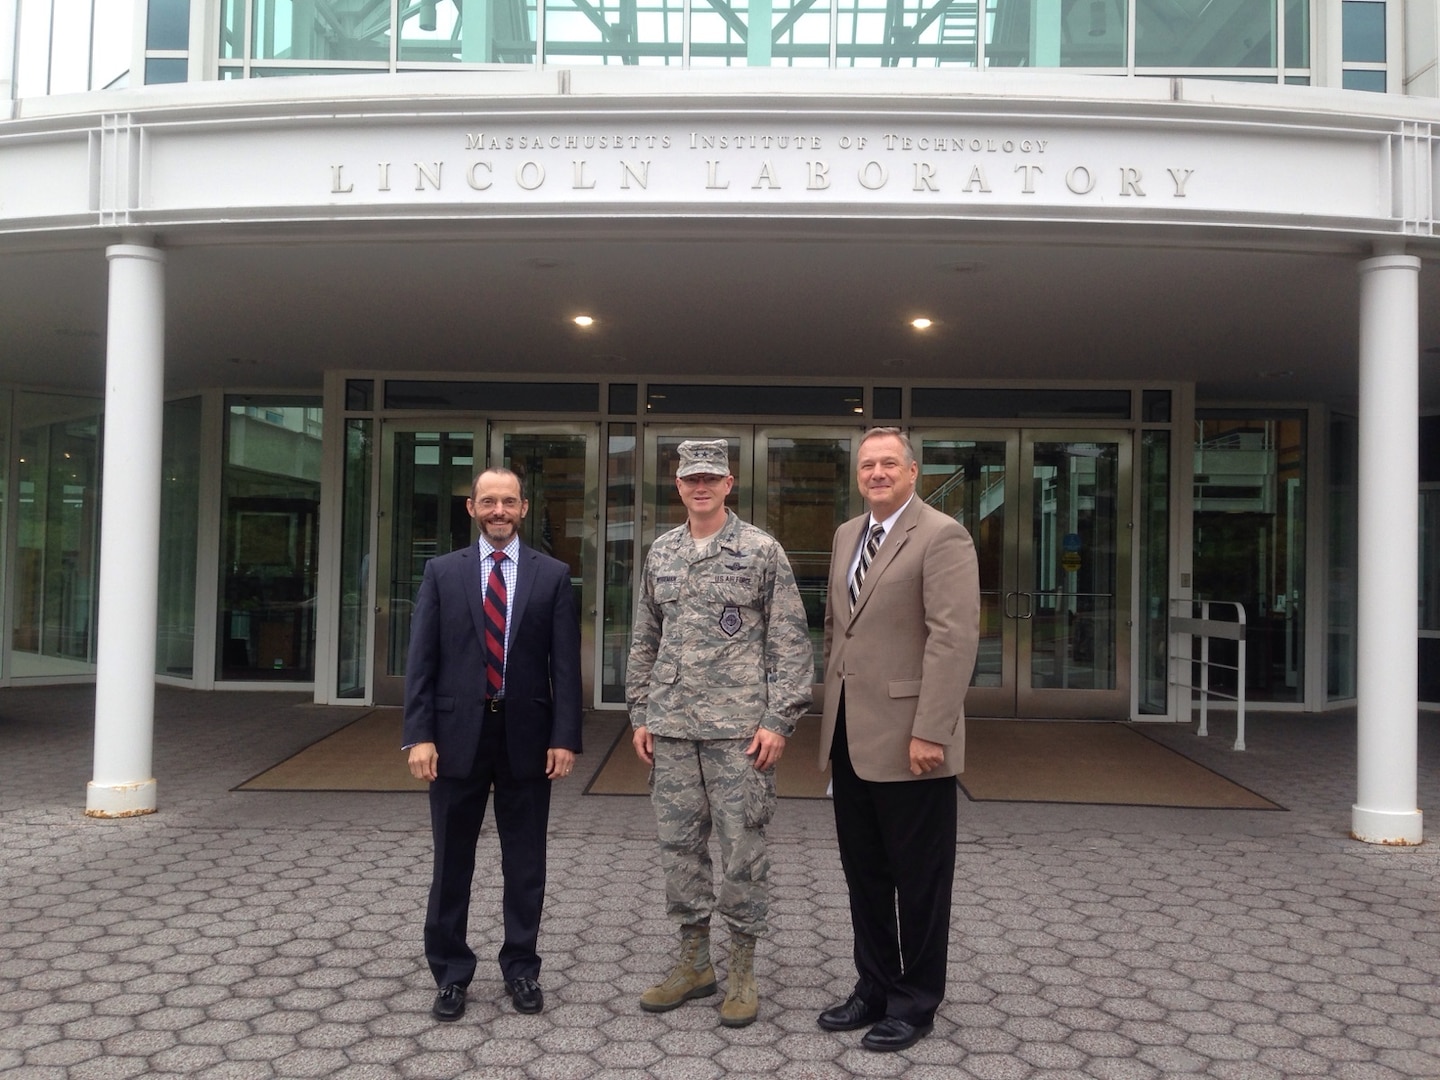 Maj. Gen. Christopher Weggeman, 24th Air Force commander, poses with Mr. Chris Putko (right), Executive Officer, Cyber Security and Communication Systems and Dr. Marc Zissman, Associate Division Head, Cyber Security and Communication Systems at Massachusetts Institute of Technology’s (MIT) Lincoln Laboratory, Lexington, Mass. 1 August.  The MIT cyber specialists briefed Weggeman on current research and development efforts related to cyber security, operations, and analytics.